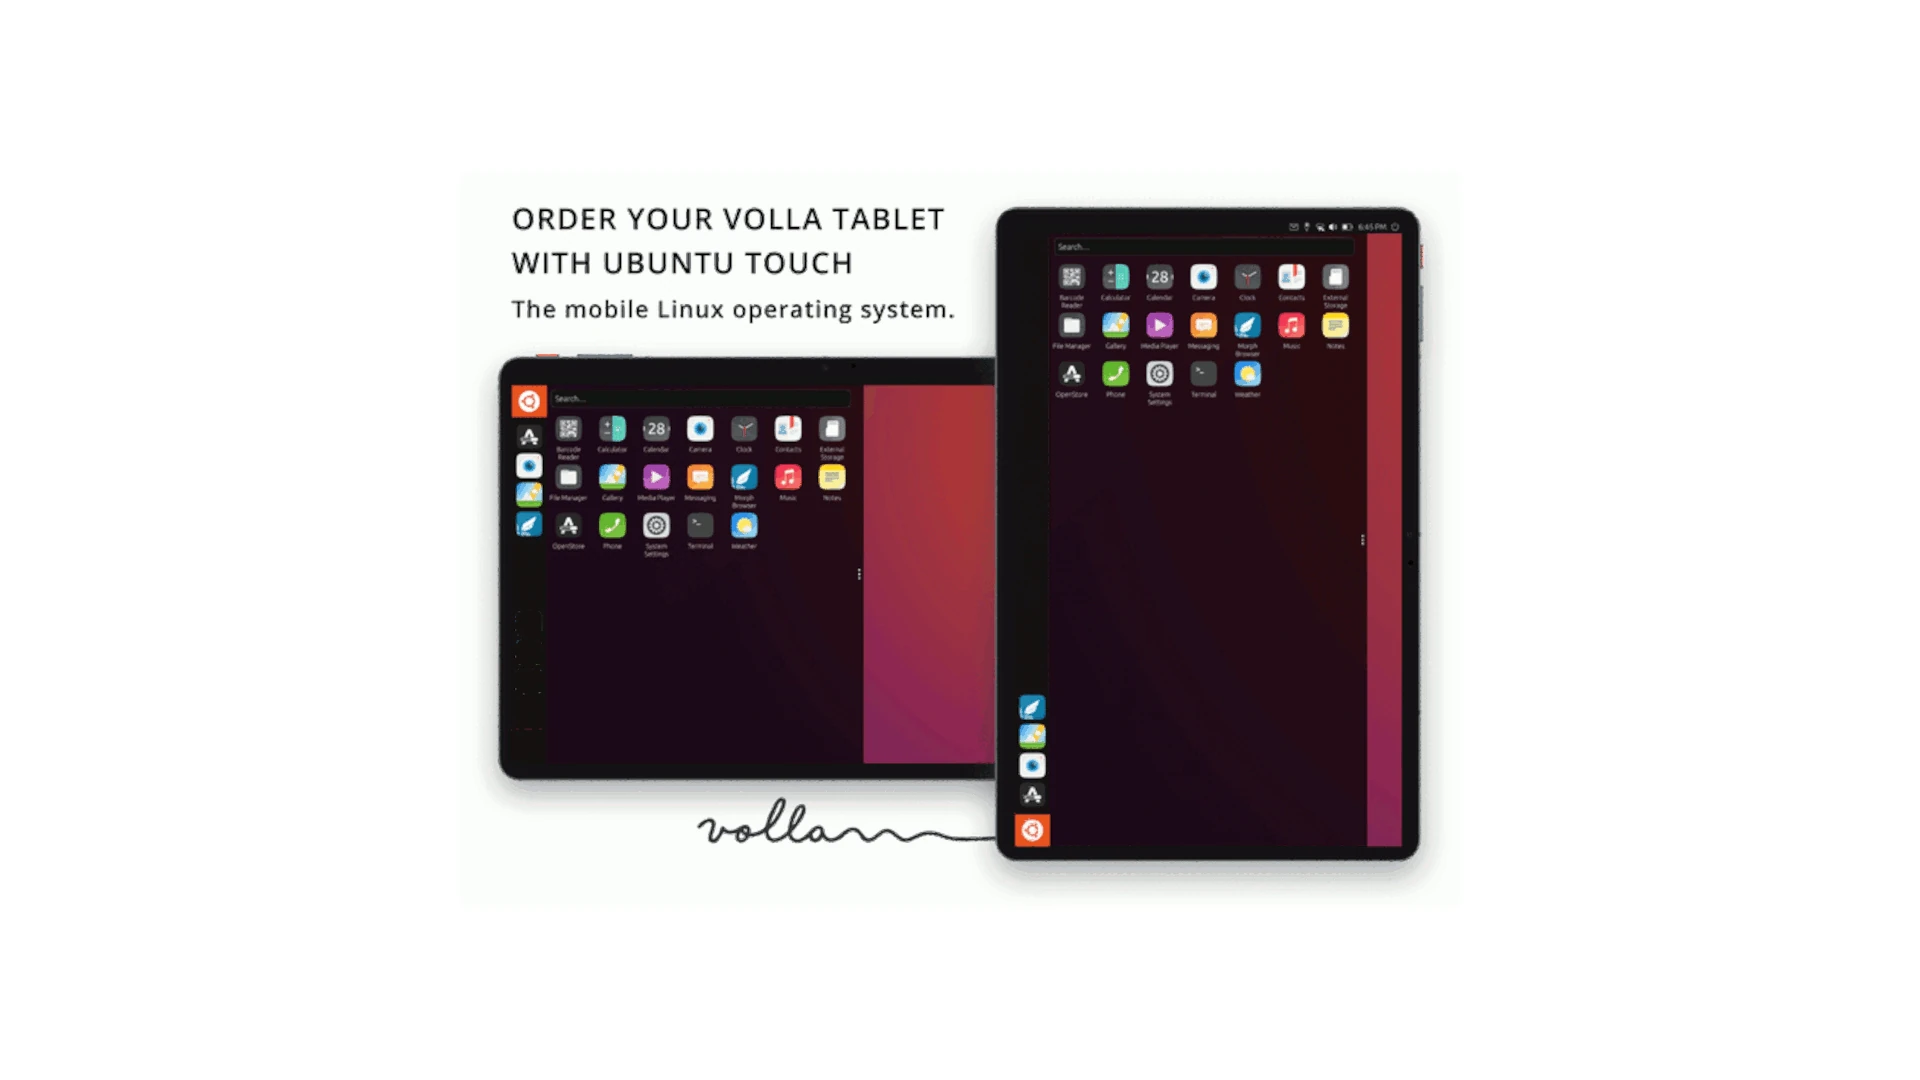 Volla Tablet Launches on Kickstarter with Support for Ubuntu Touch